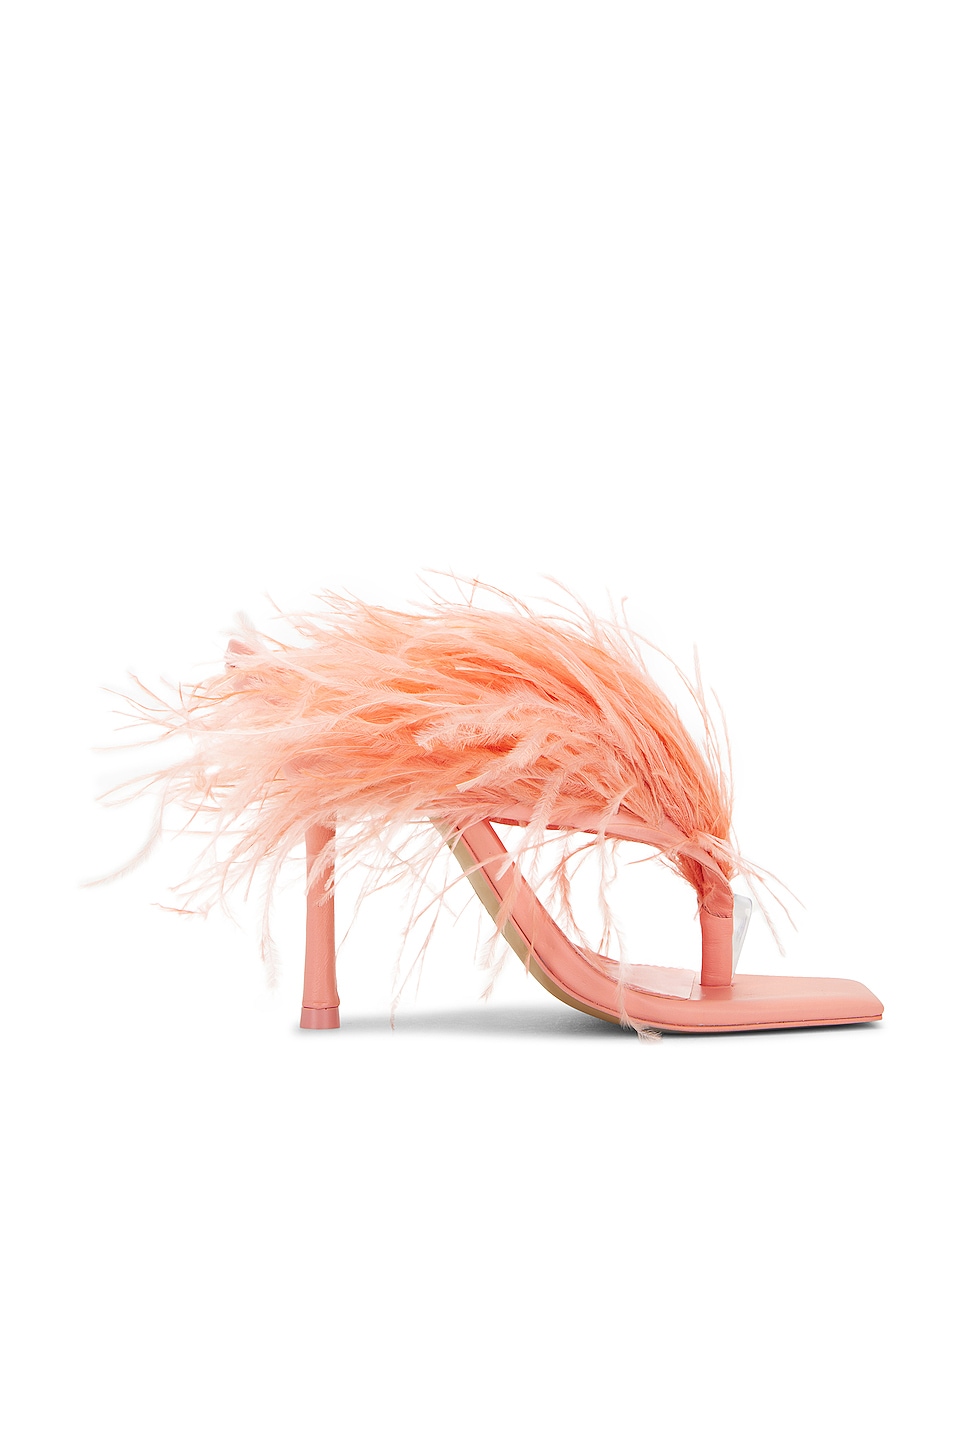 Coral heels with feathers from Cult Gaia